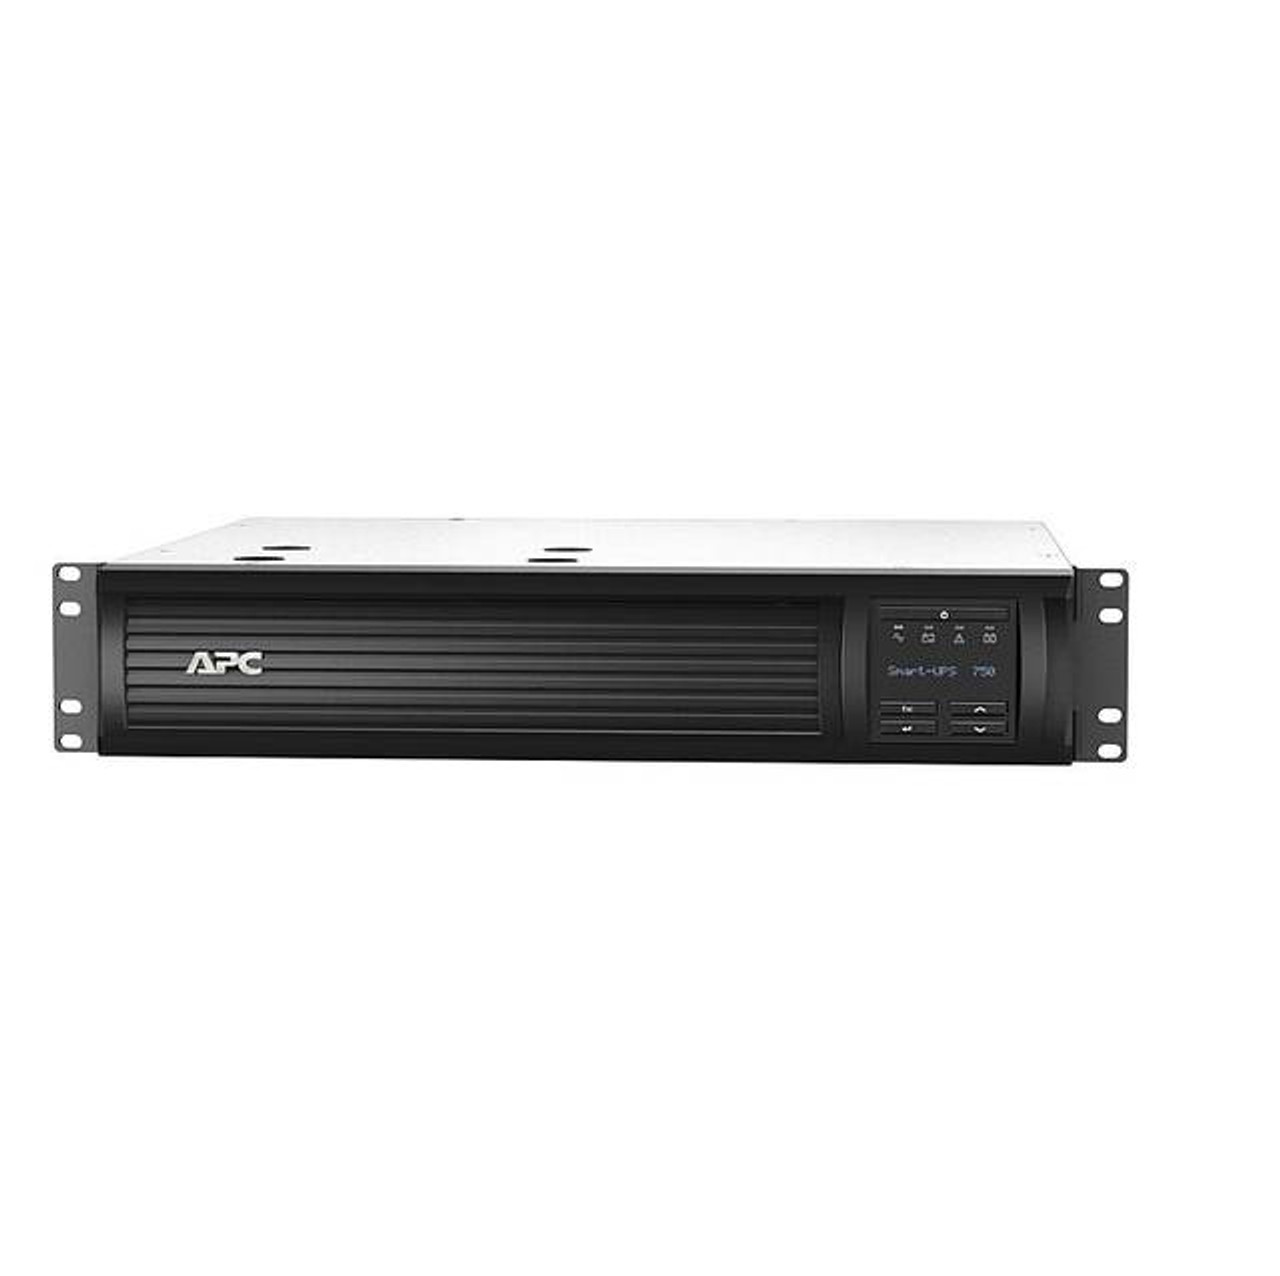 Smt750rm2u Apc Smart Ups Rm Smt750rm2u 500w750va 120v 2u Rackmount Lcd Ups System 6746